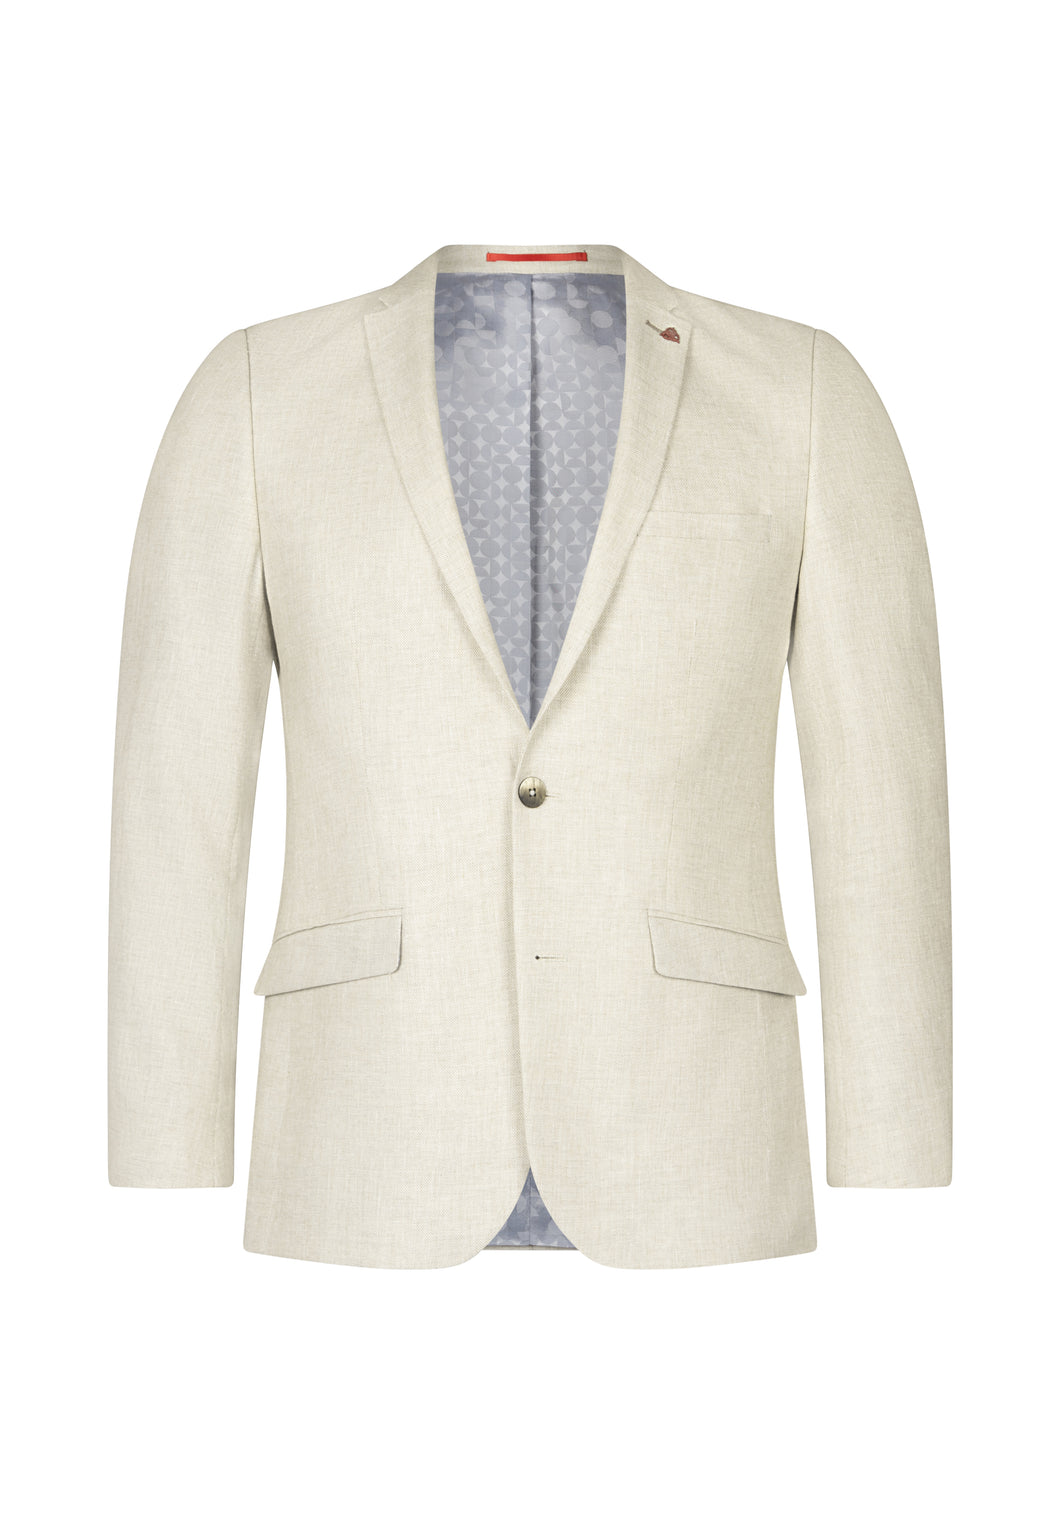 ROY ROBSON Slim Fit Linen and Cotton Jacket in Light Beige 08106 2082